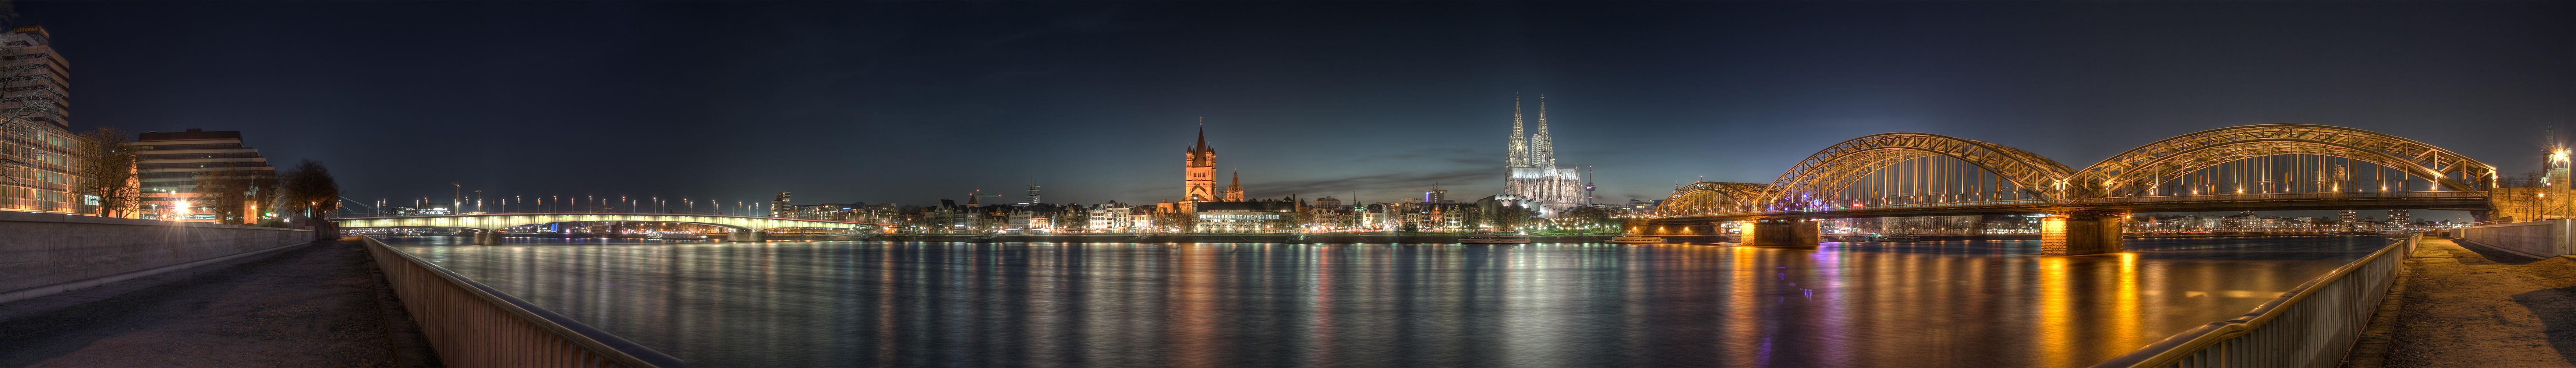 Cologne - Panoramic Image of the old town at dusk